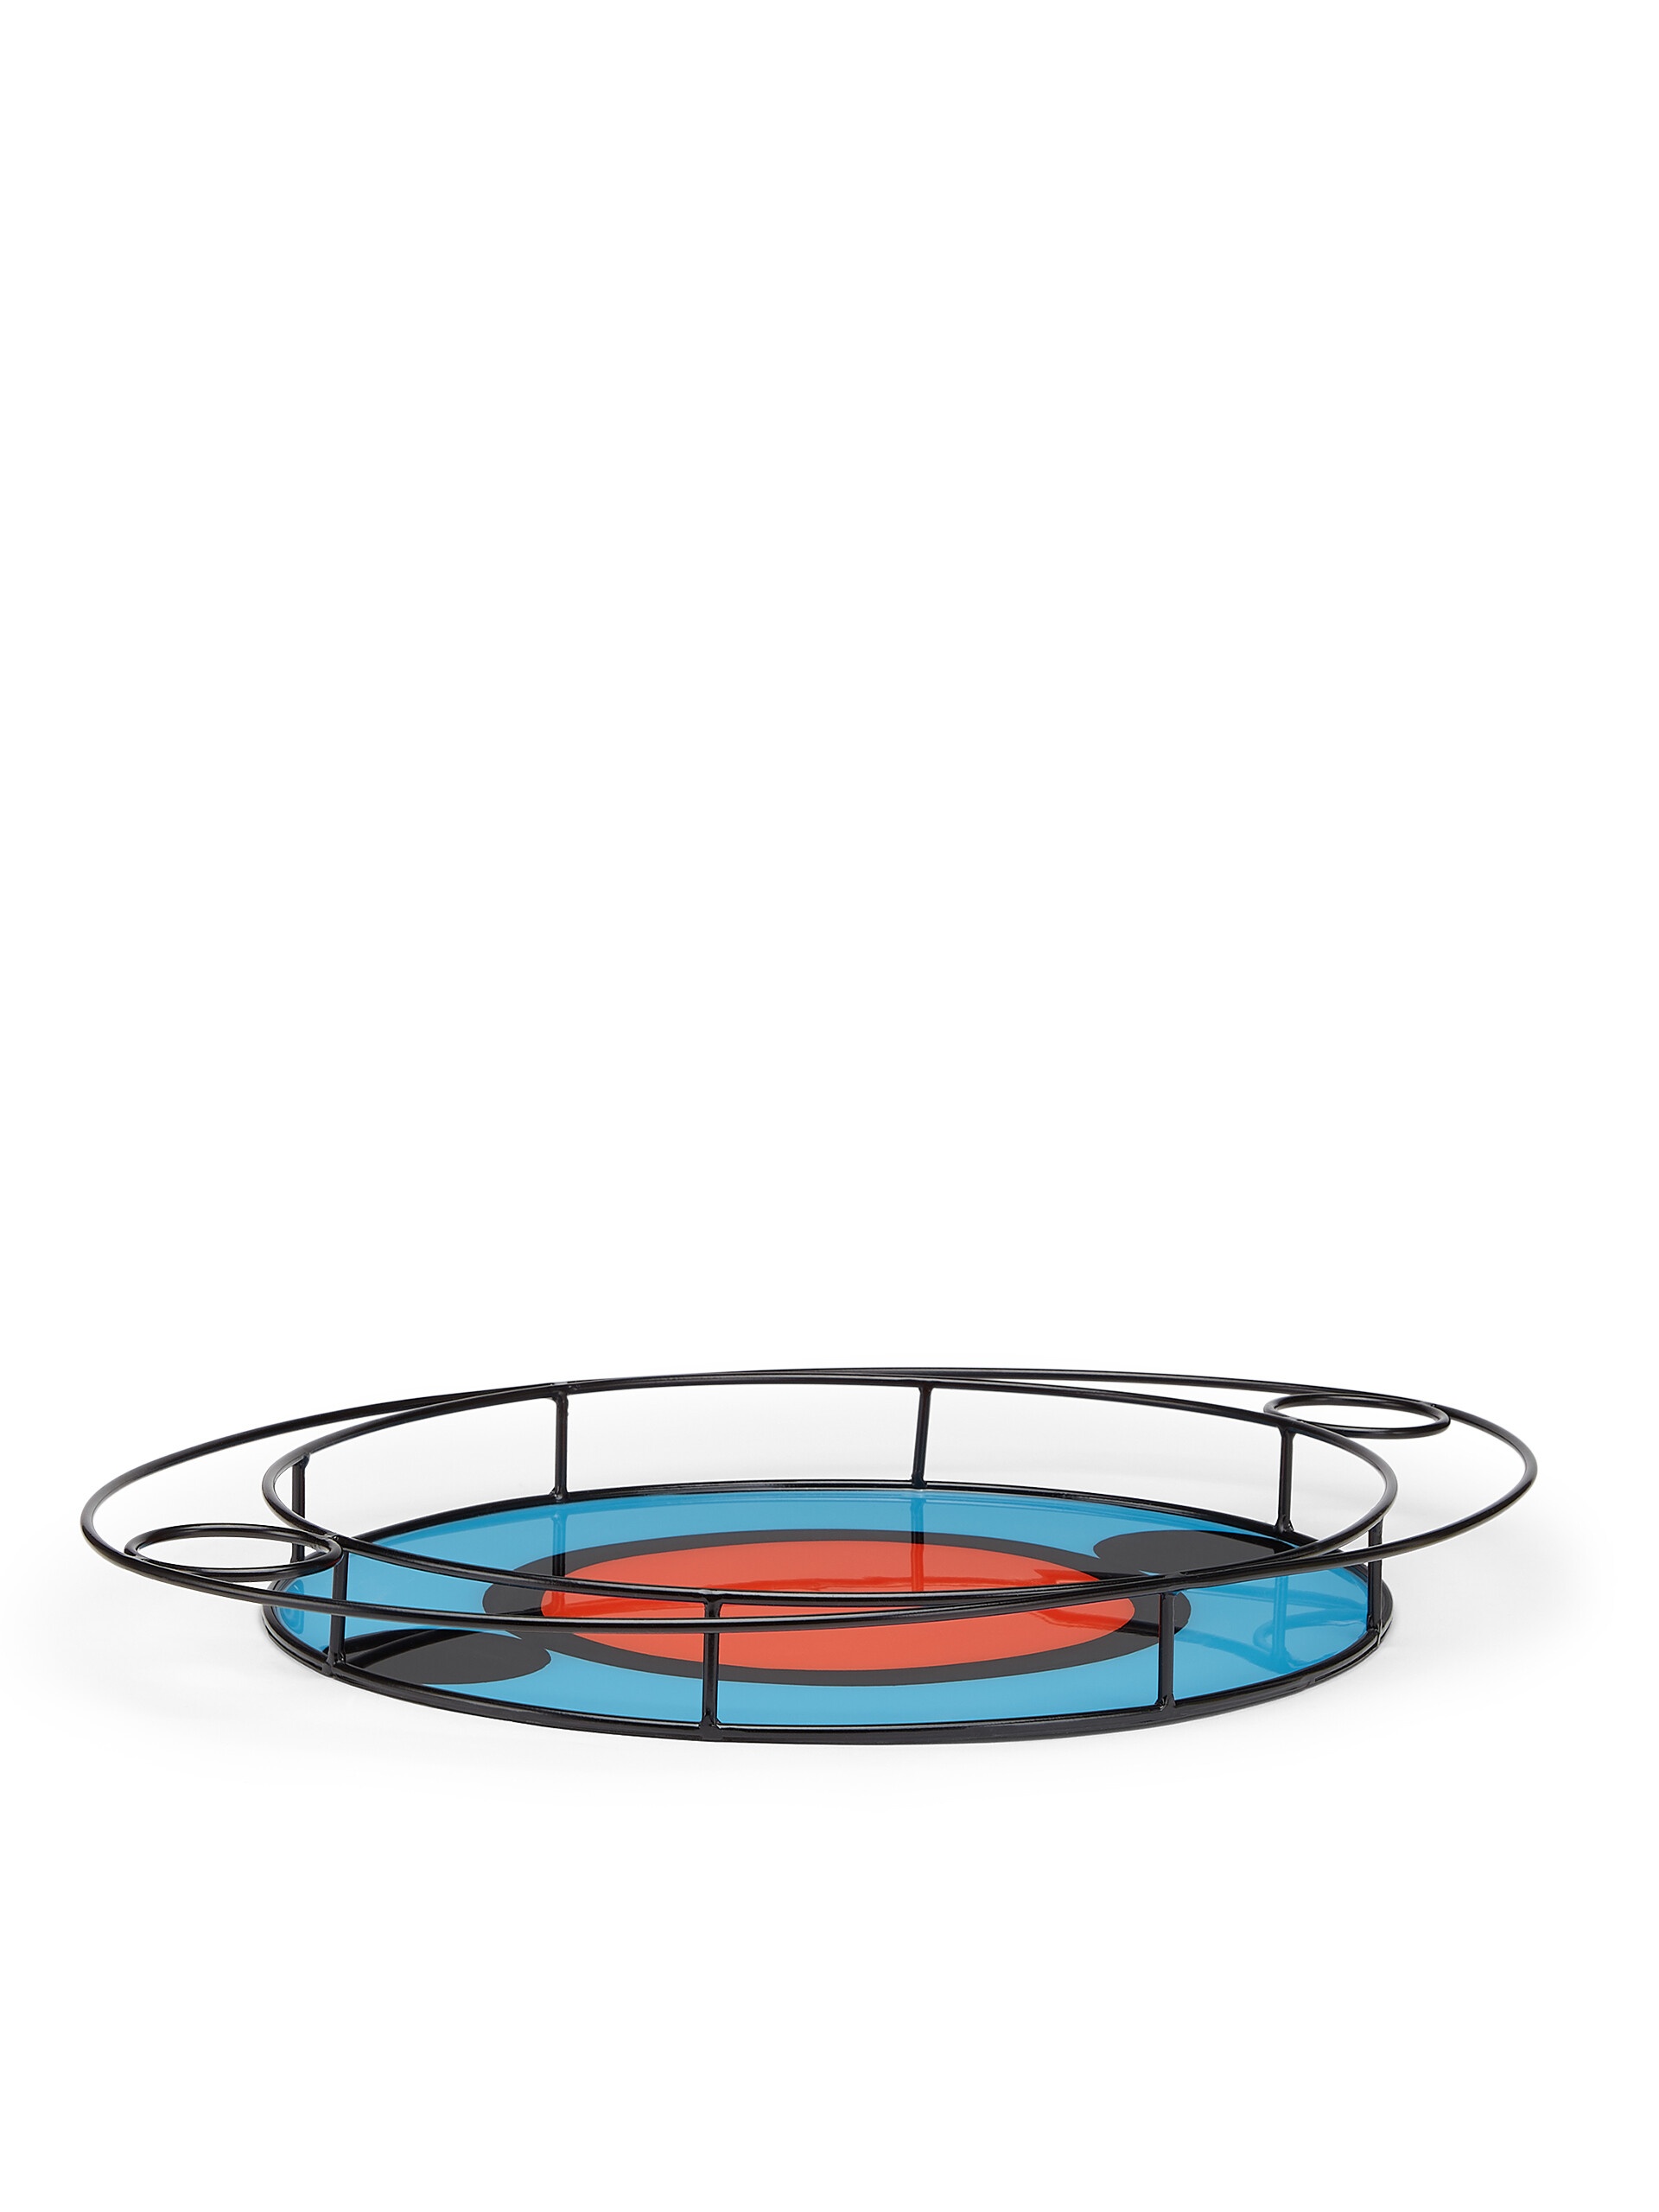 MARNI MARKET OVAL TRAY IN IRON AND BLUE, BLACK AND RED RESIN - 2